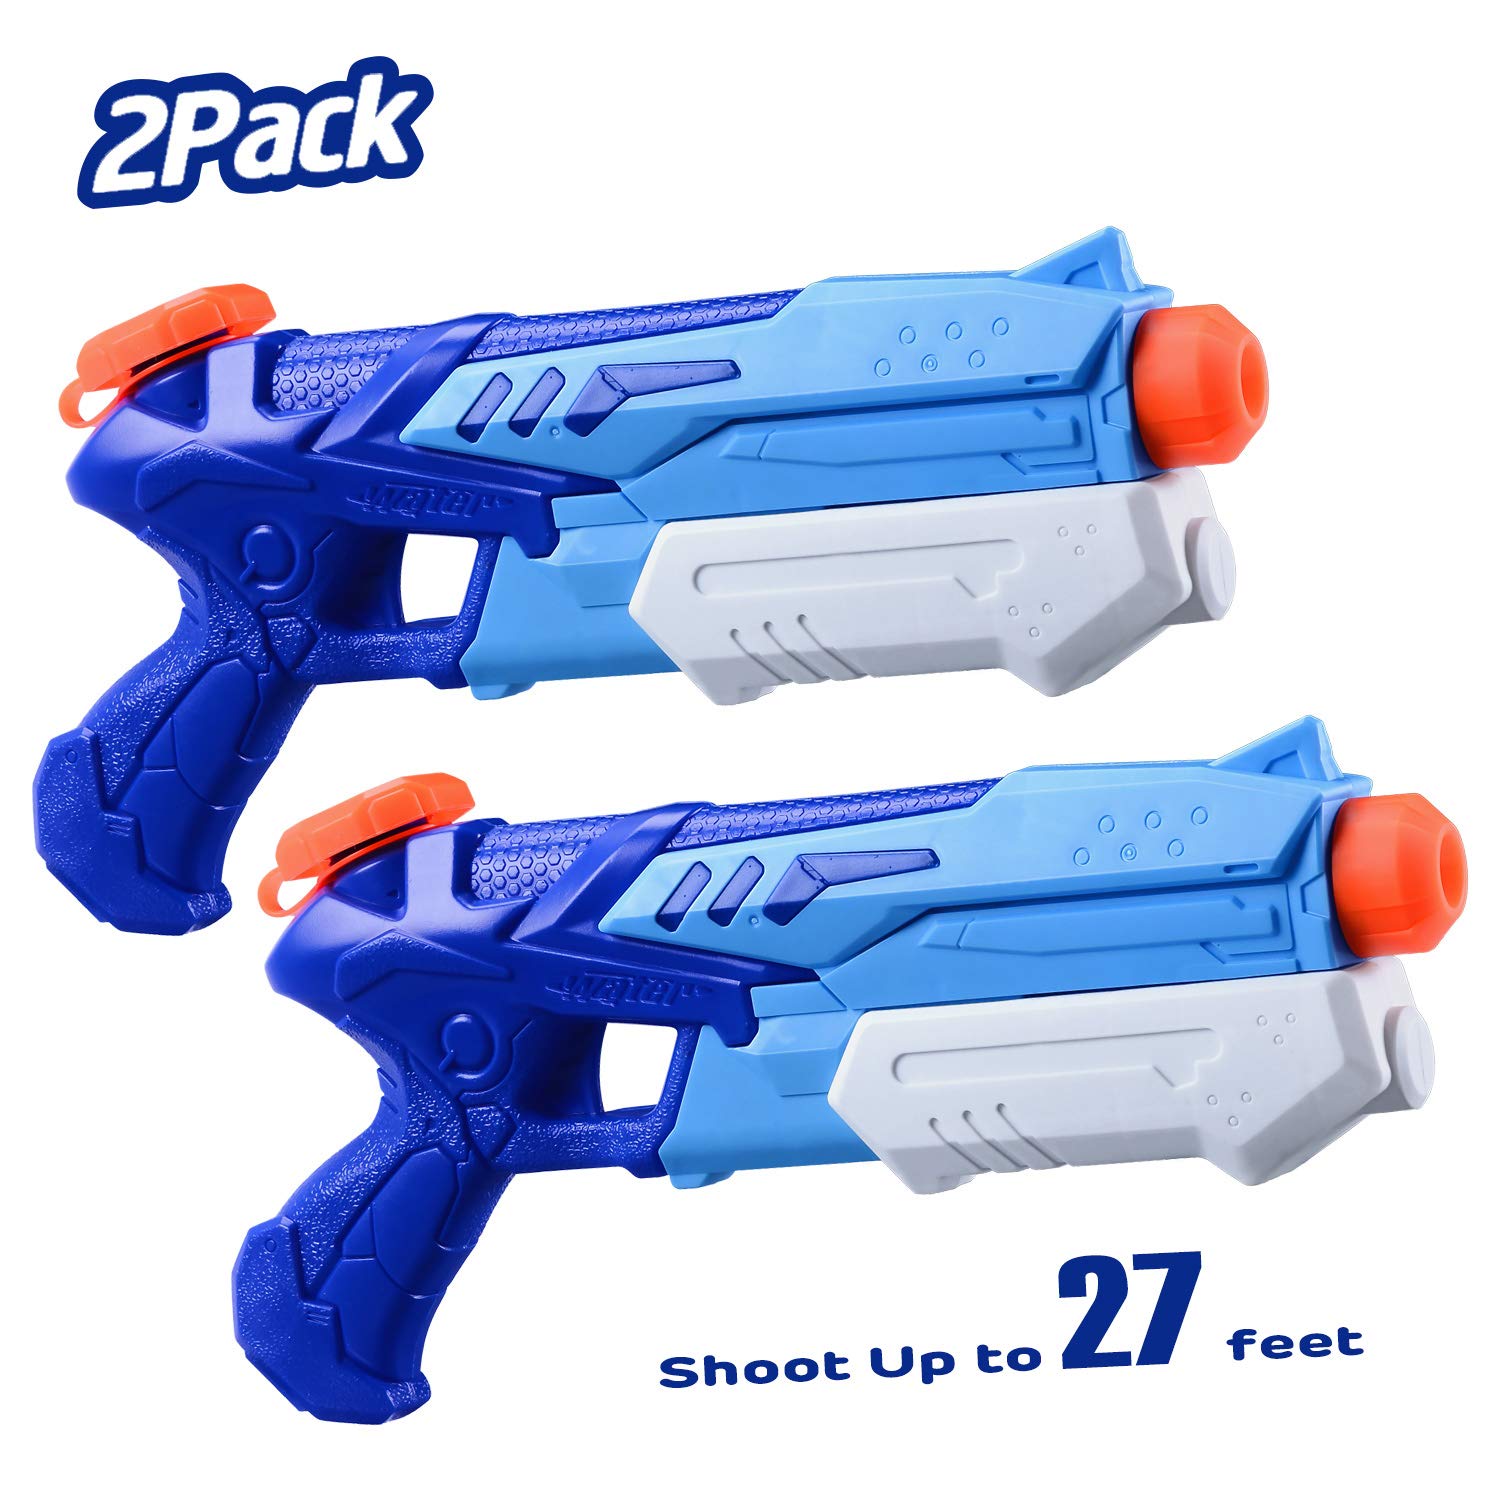 HITOP Water Guns for Kids 2 Pack Super Soaker Water Blaster Squirt Guns 300CC Toy Summer Swimming Pool Beach Sand Outdoor Water Fighting Play Toys Gifts for Boys Girls Children